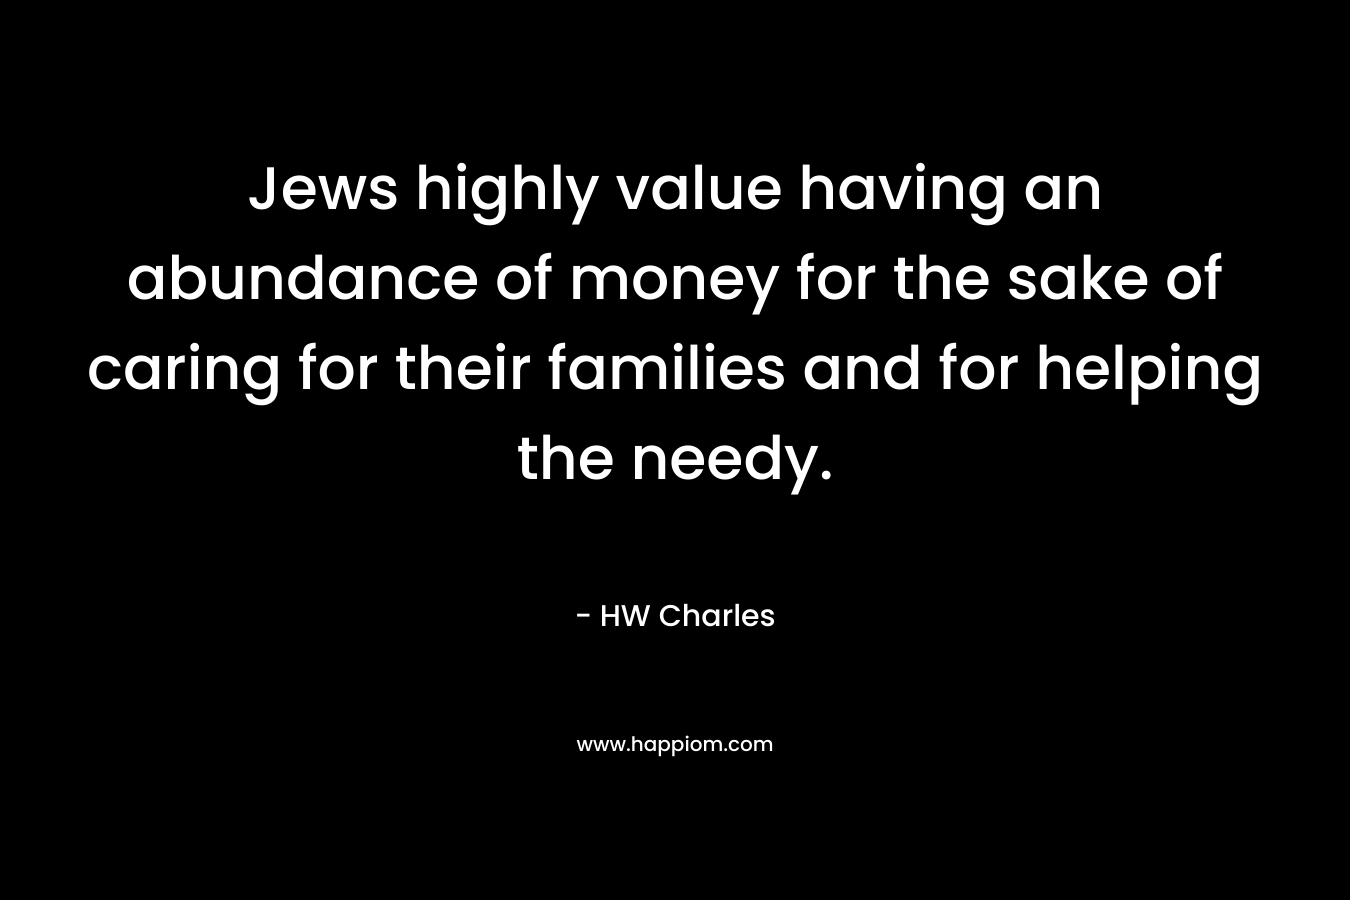 Jews highly value having an abundance of money for the sake of caring for their families and for helping the needy.